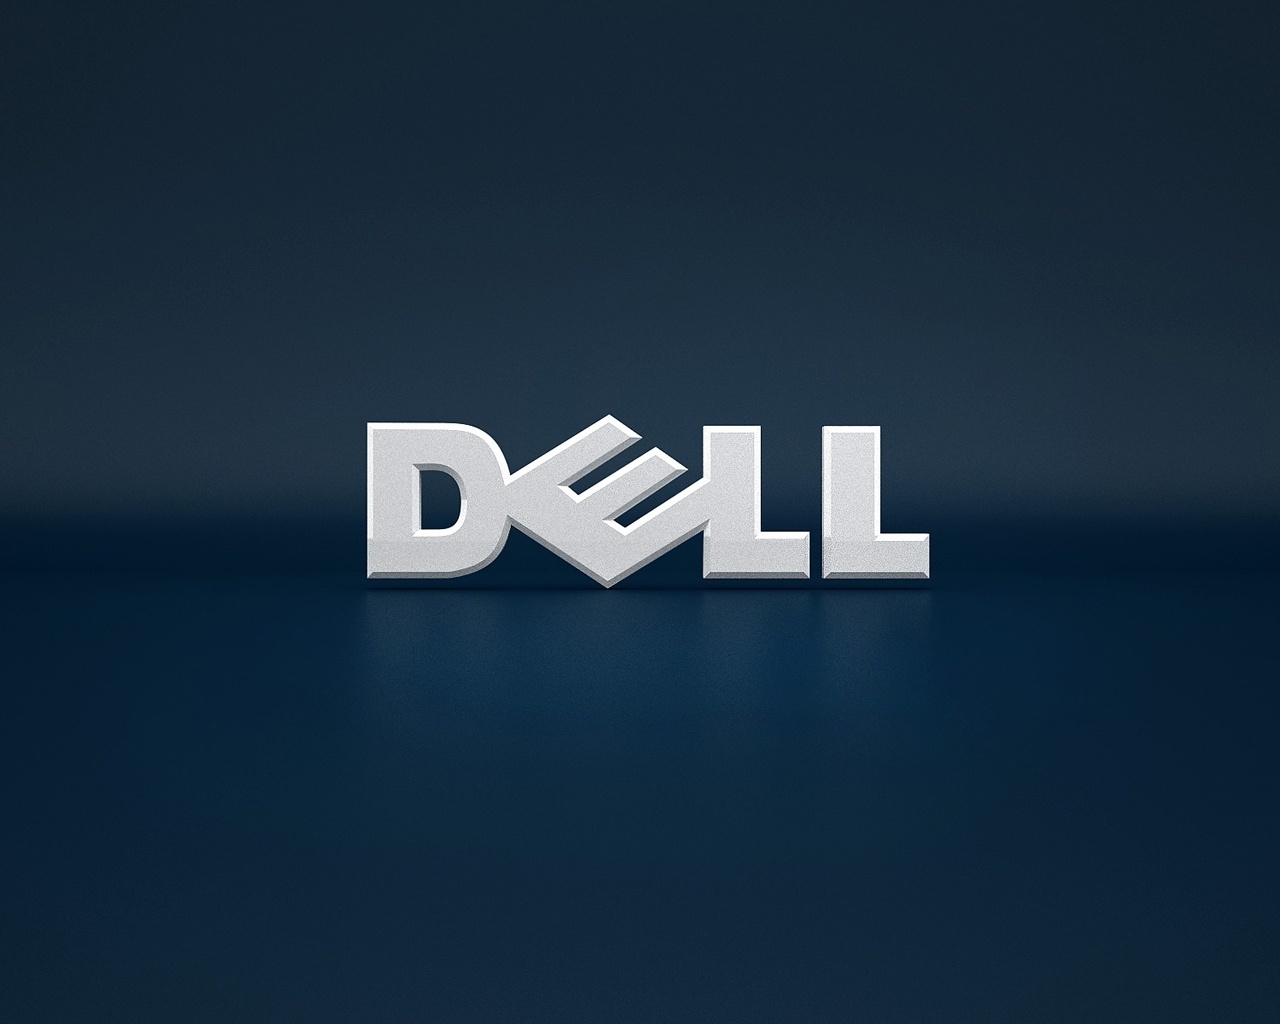 Dell blue background for 1280 x 1024 resolution